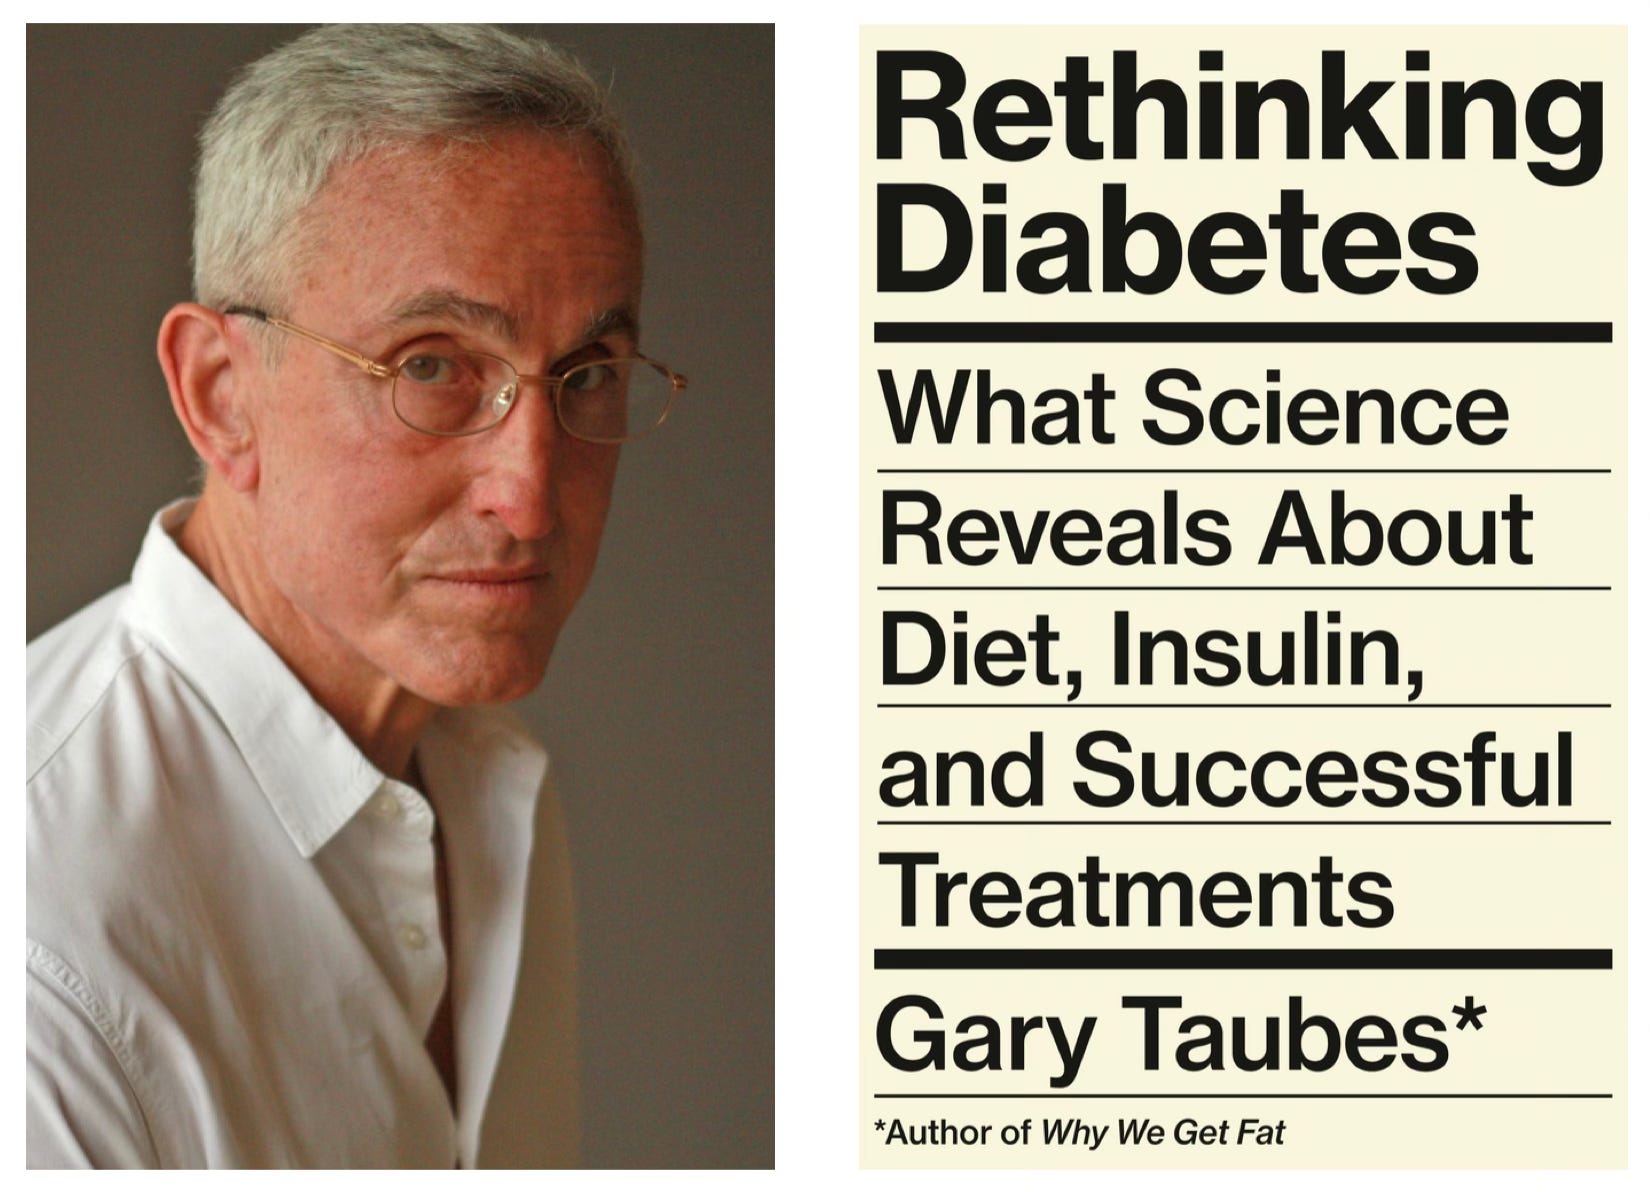 Gary Taubes: Pseudoscientific Dietary Dogma Caused Obesity And Diabetes Disasters